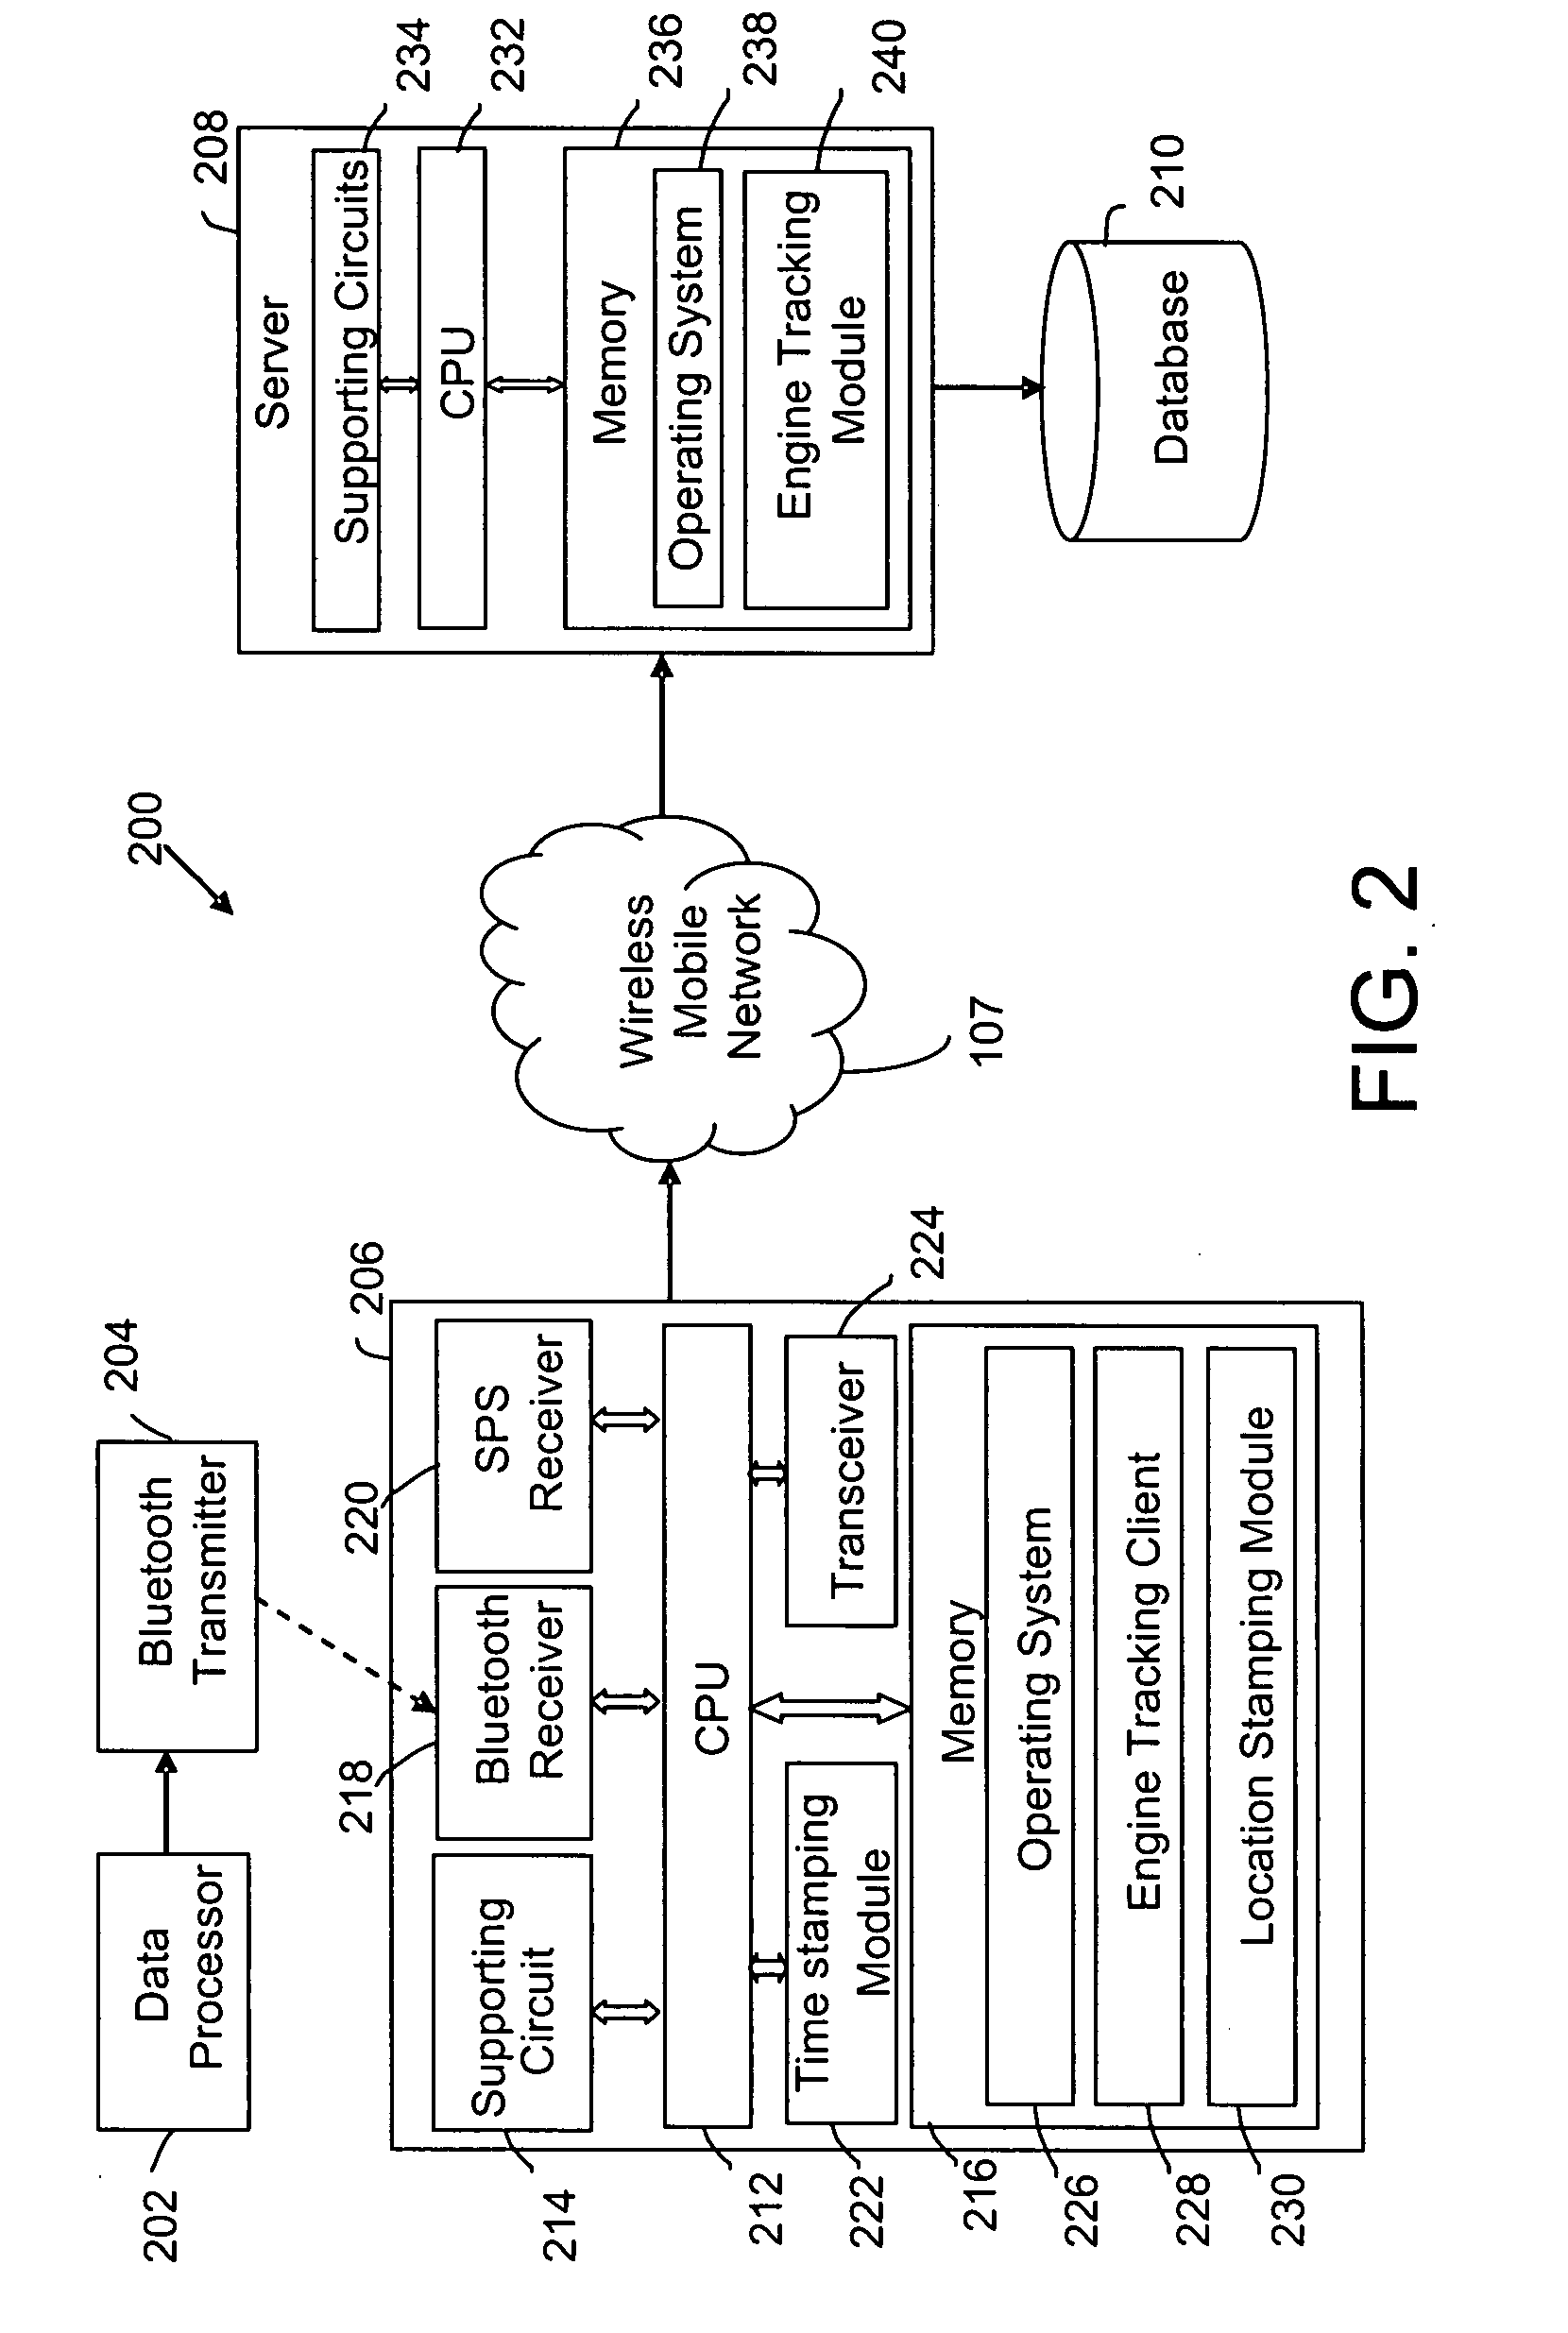 Method and apparatus for vehicle performance tracking